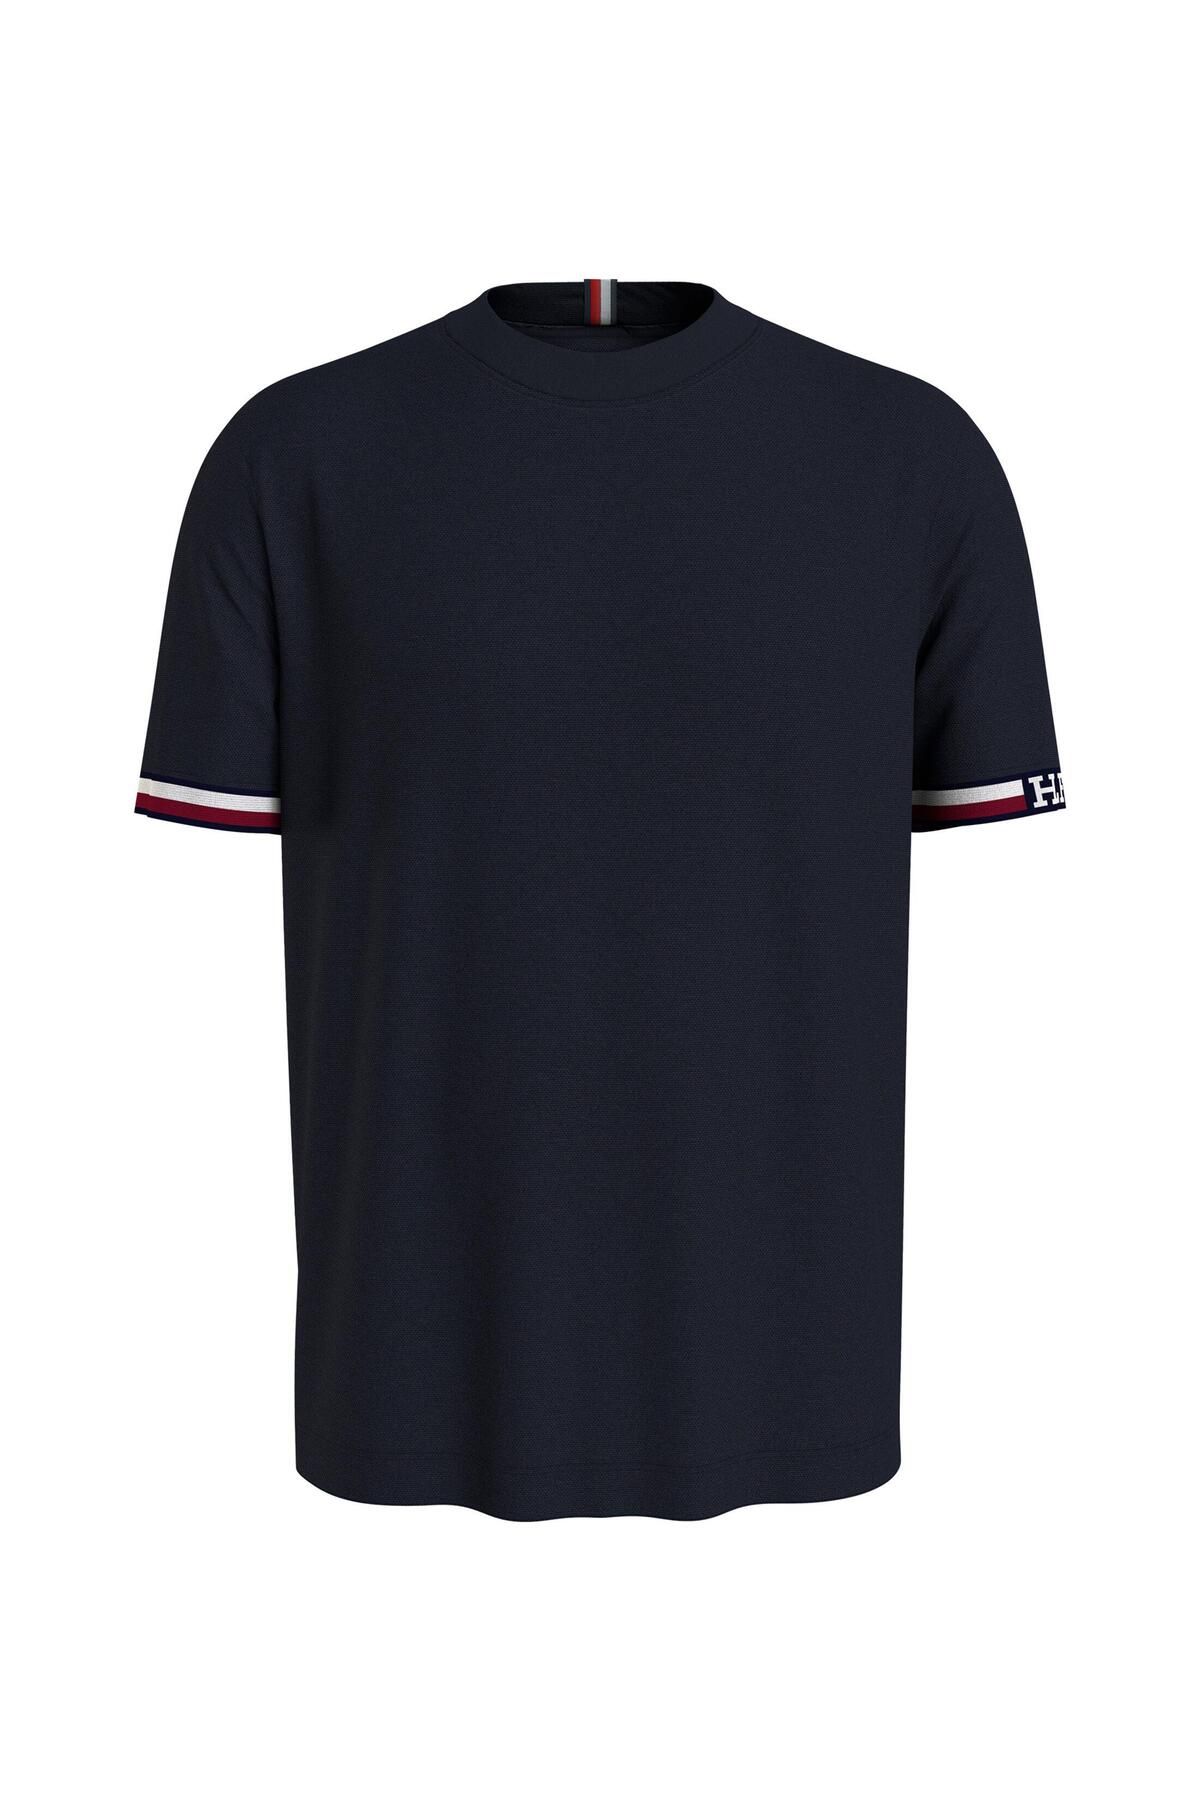 Tommy Hilfiger MONOTYPE BOLD GS TIPPING TEE